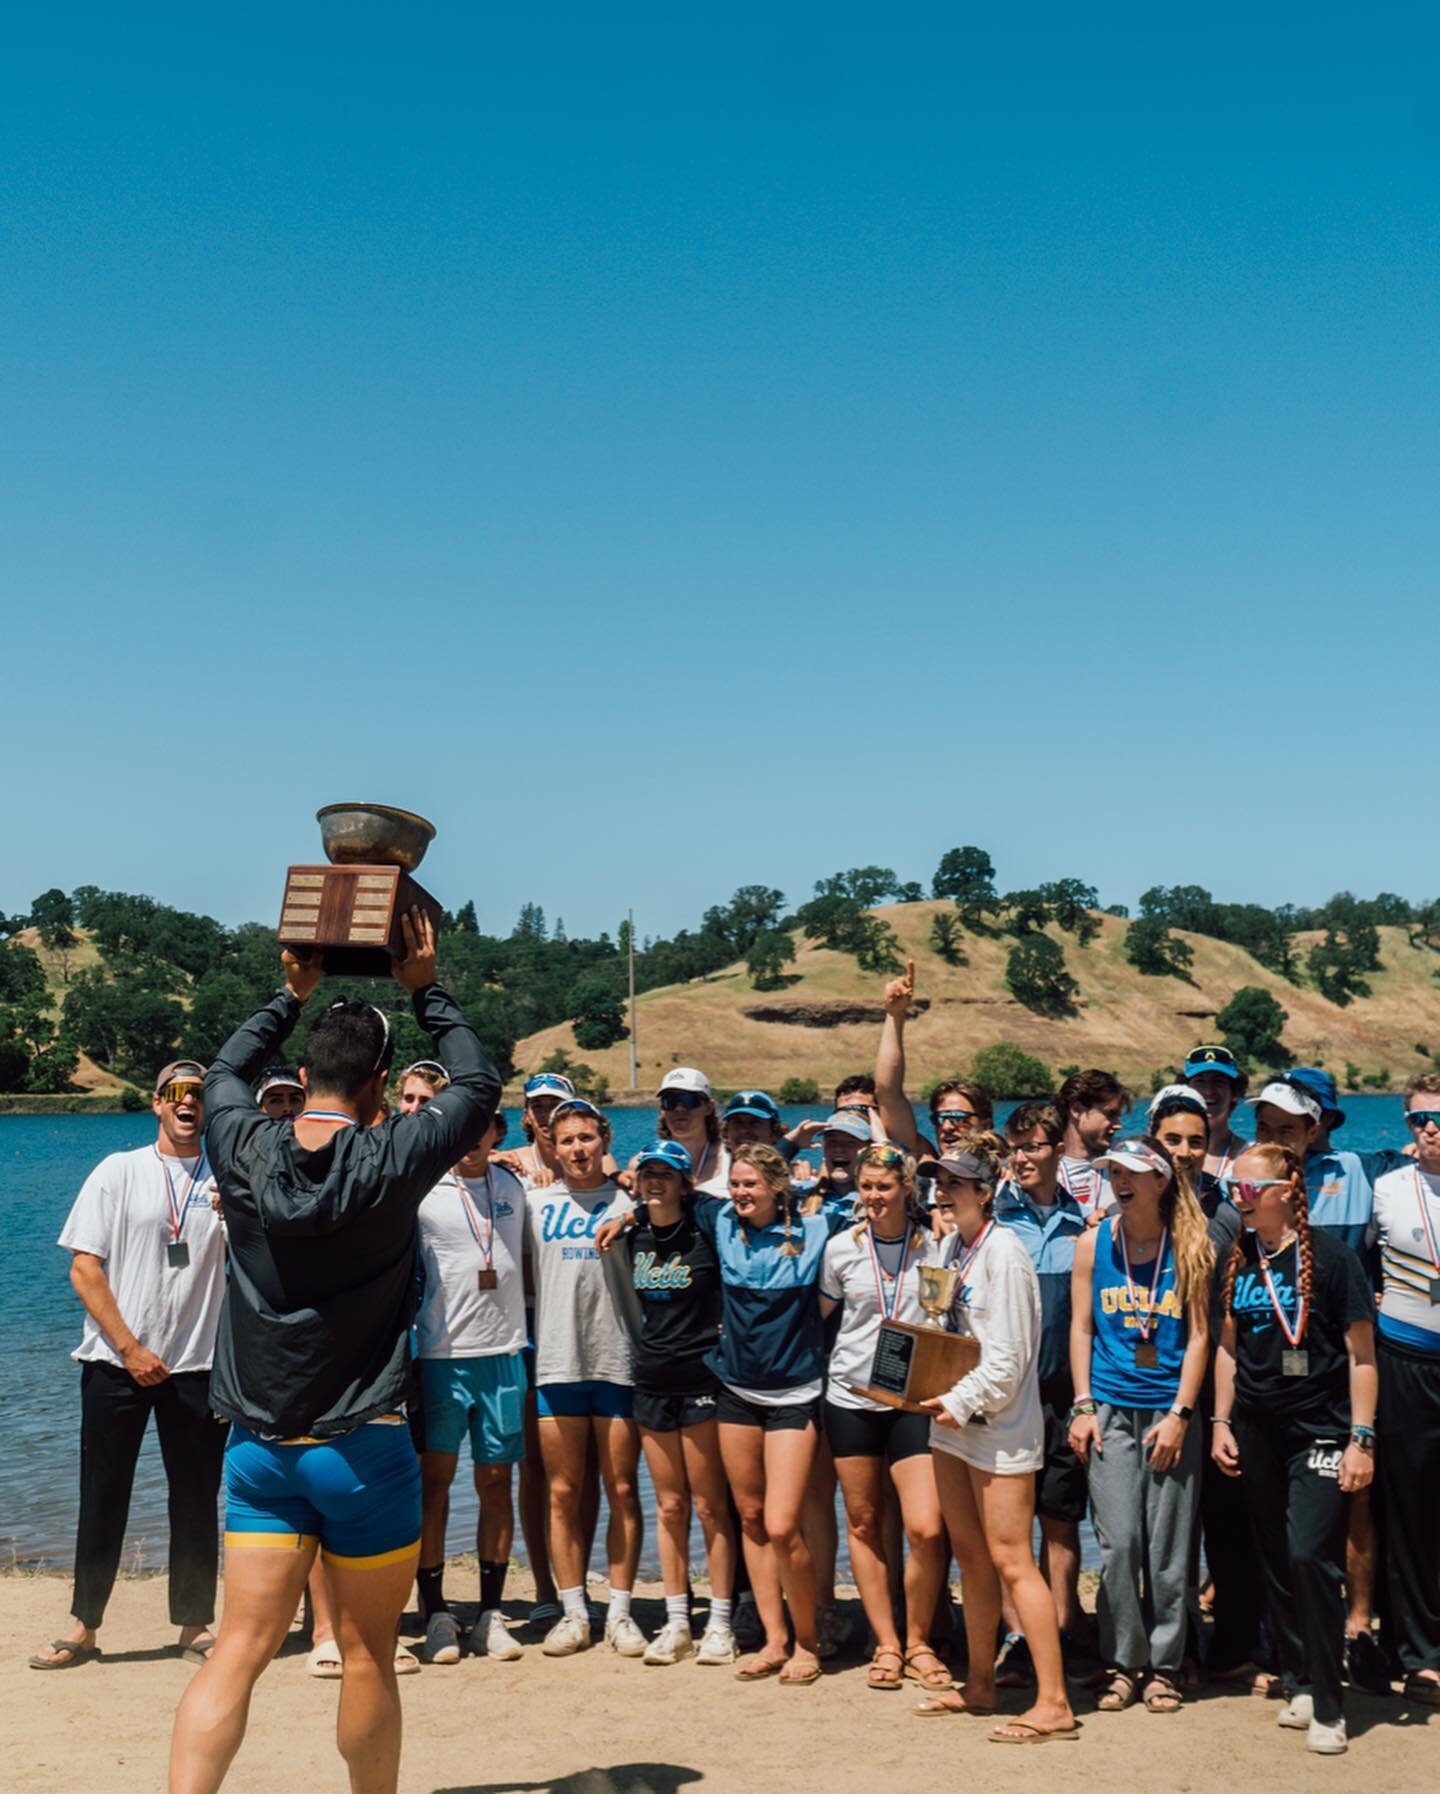 🏆TEAM POINTS TROPHY🏆

The Bruins bring home the WIRA team points trophy, a perfect finish to a great weekend of racing!

The highlight of Sunday was the N4+ Grand Final with the Bruins taking gold! 

All other Bruin boats finished on the podiums an